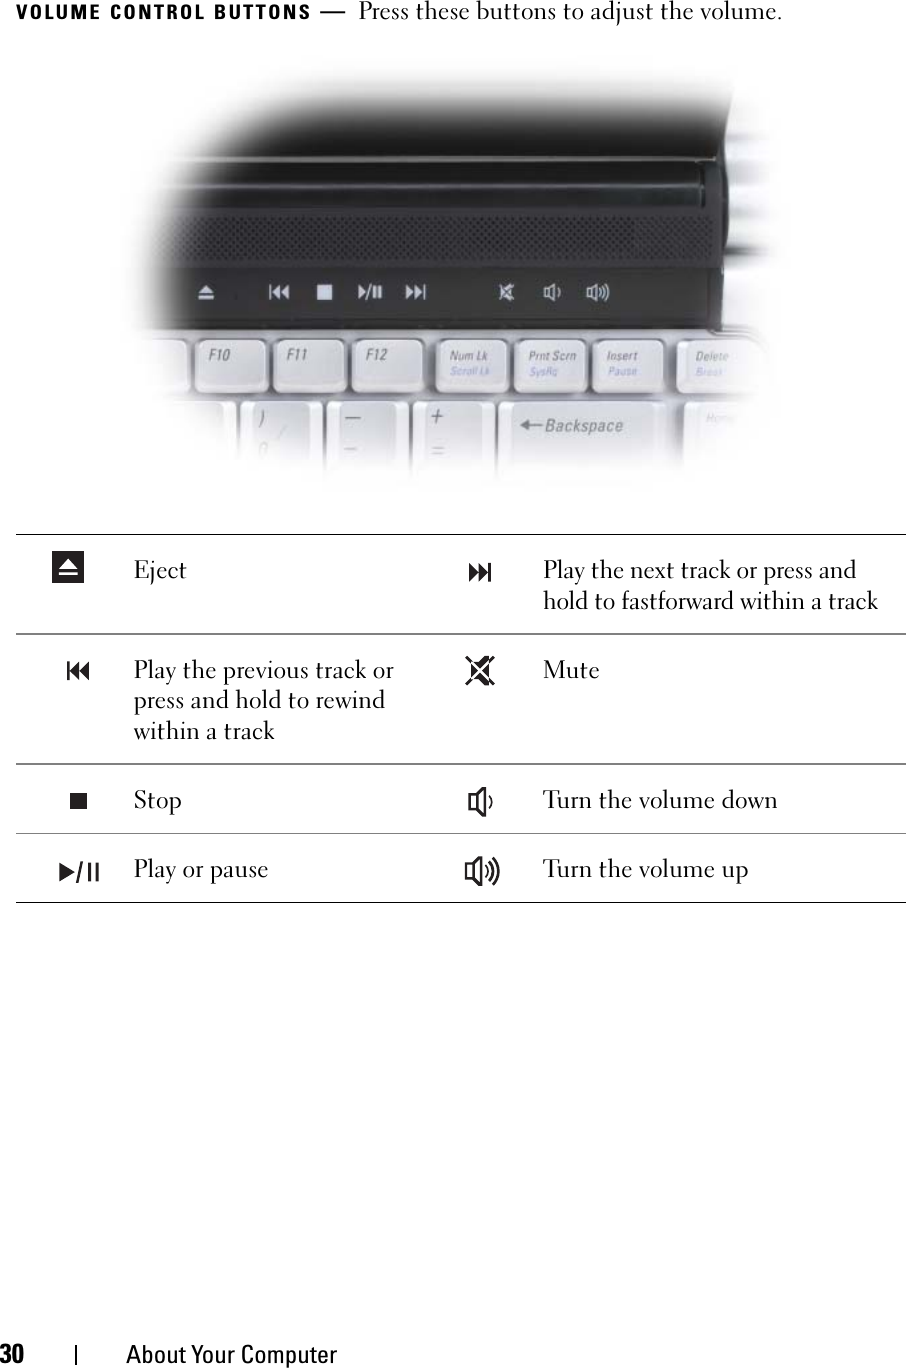 30 About Your ComputerVOLUME CONTROL BUTTONS —Press these buttons to adjust the volume.Eject Play the next track or press and hold to fastforward within a trackPlay the previous track or press and hold to rewind within a trackMuteStop Turn the volume downPlay or pause Turn the volume up